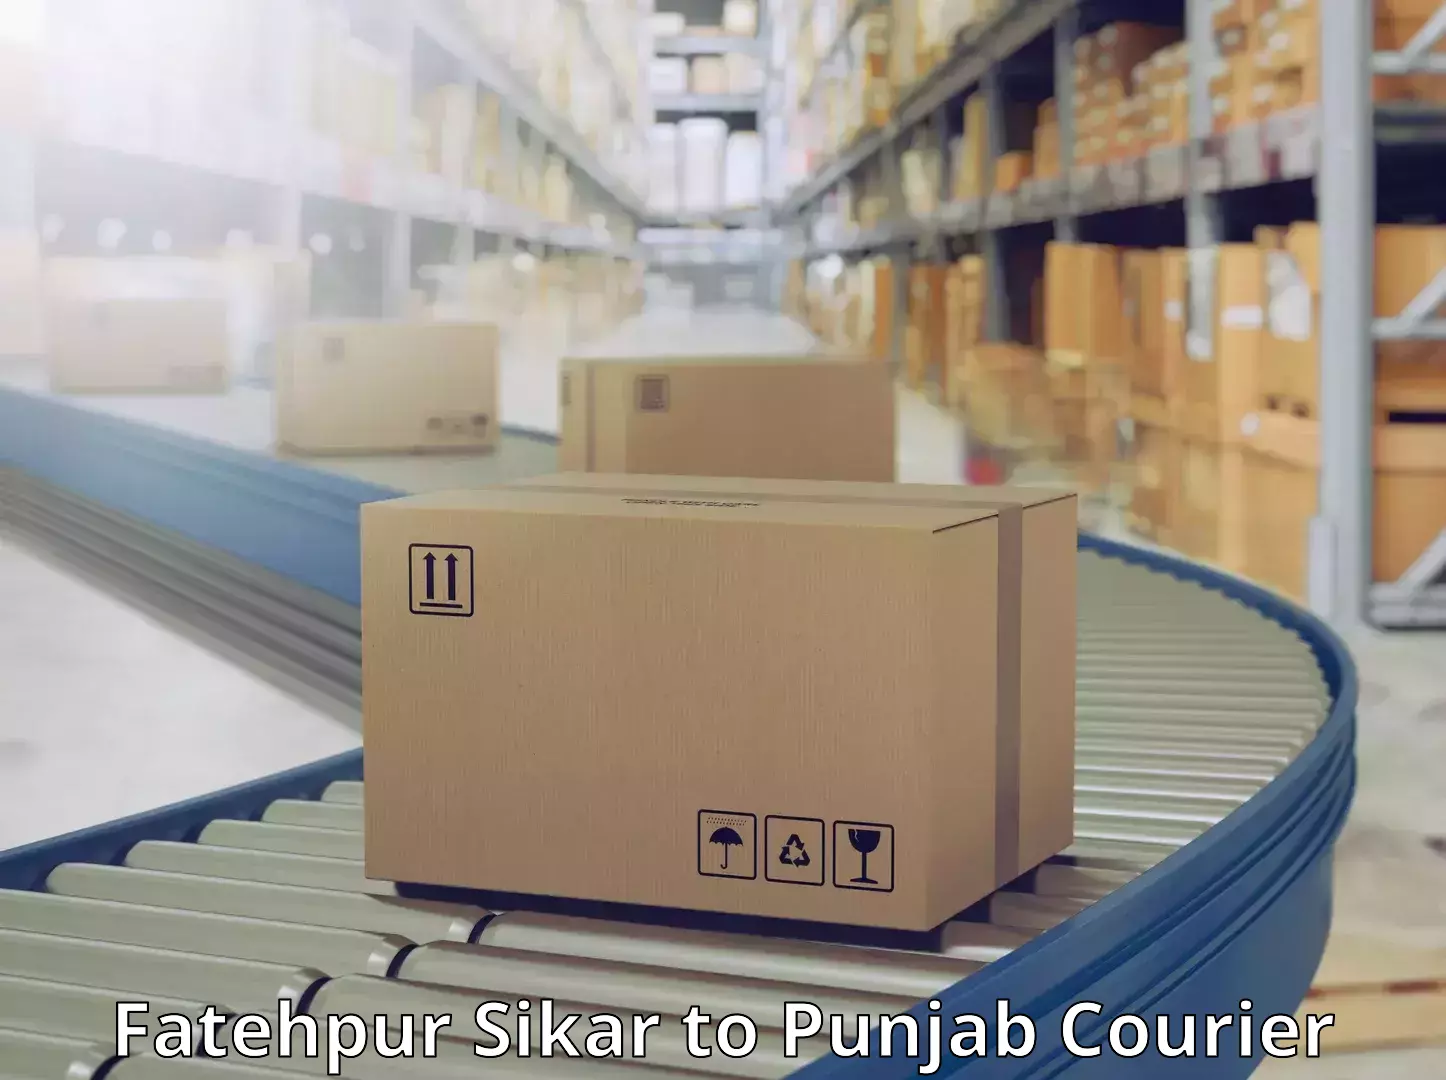 State-of-the-art courier technology Fatehpur Sikar to Punjab